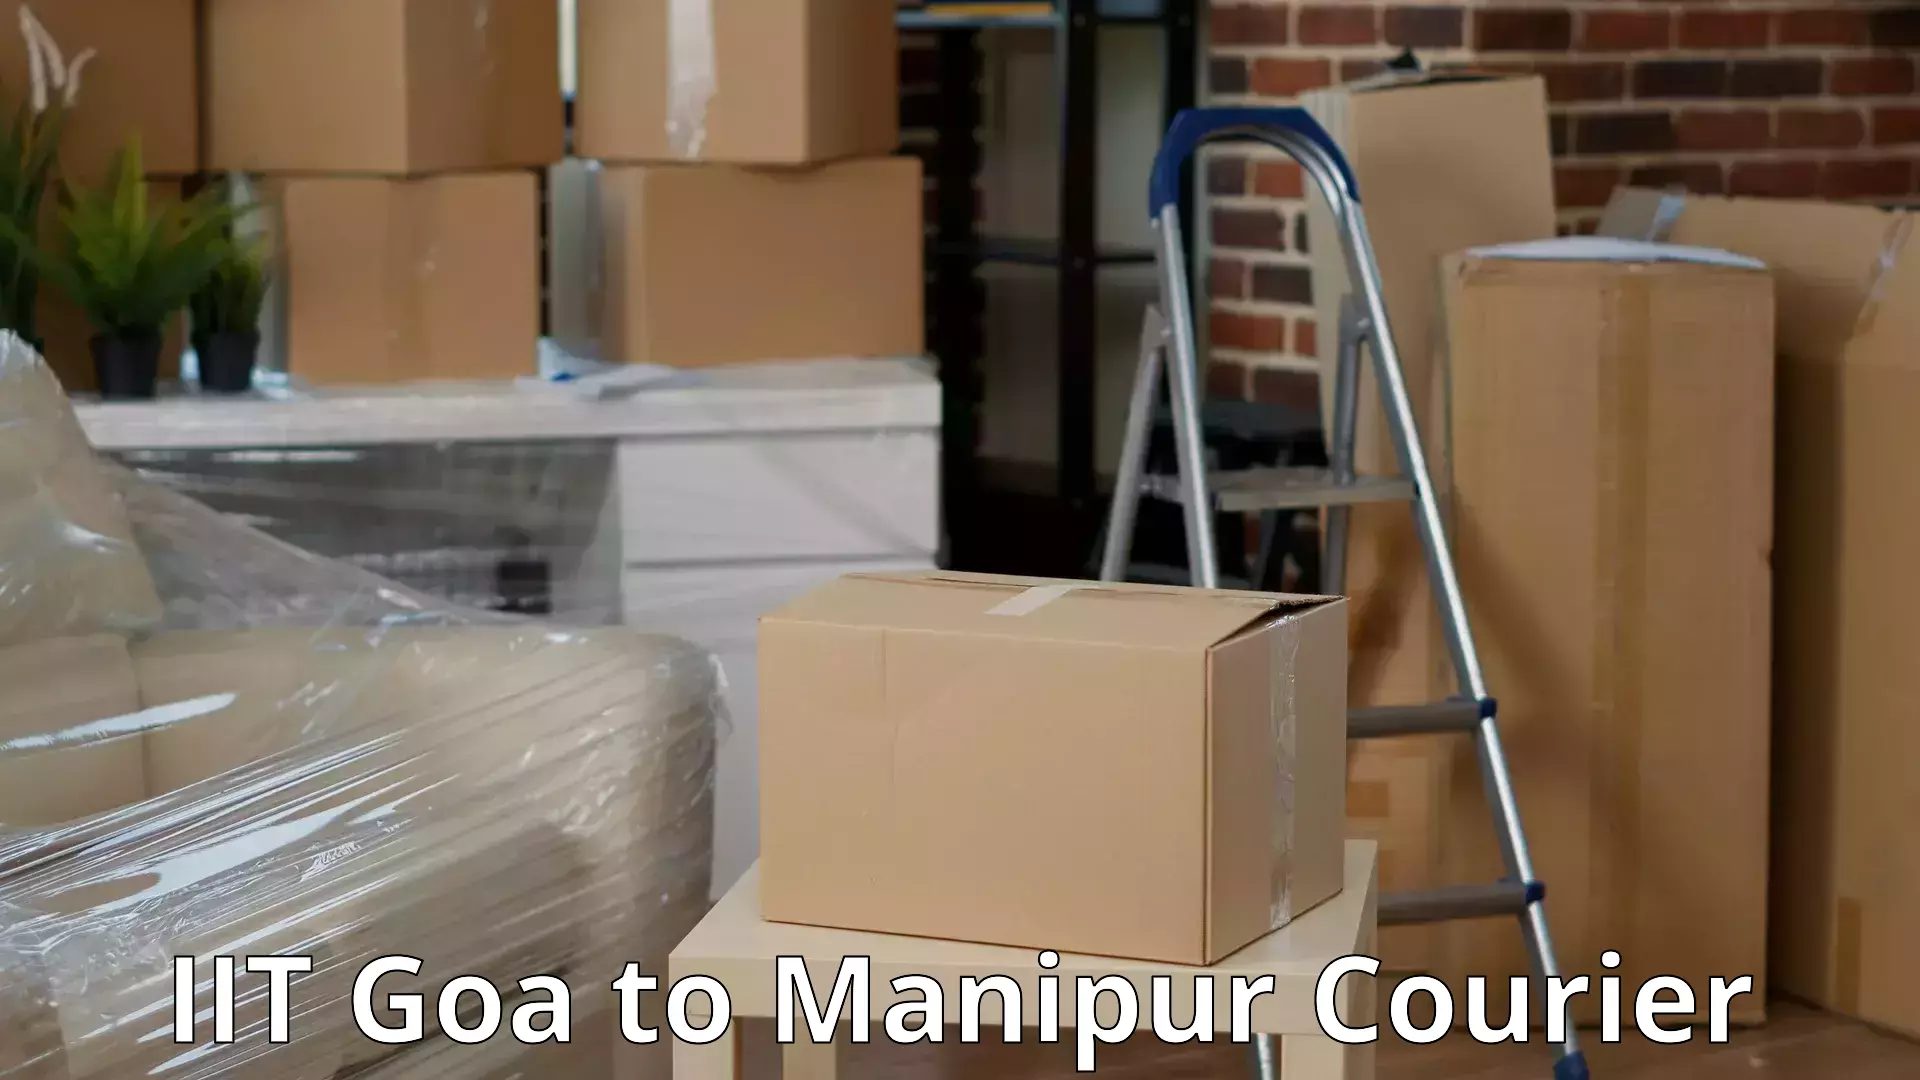 Furniture delivery service IIT Goa to Tamenglong